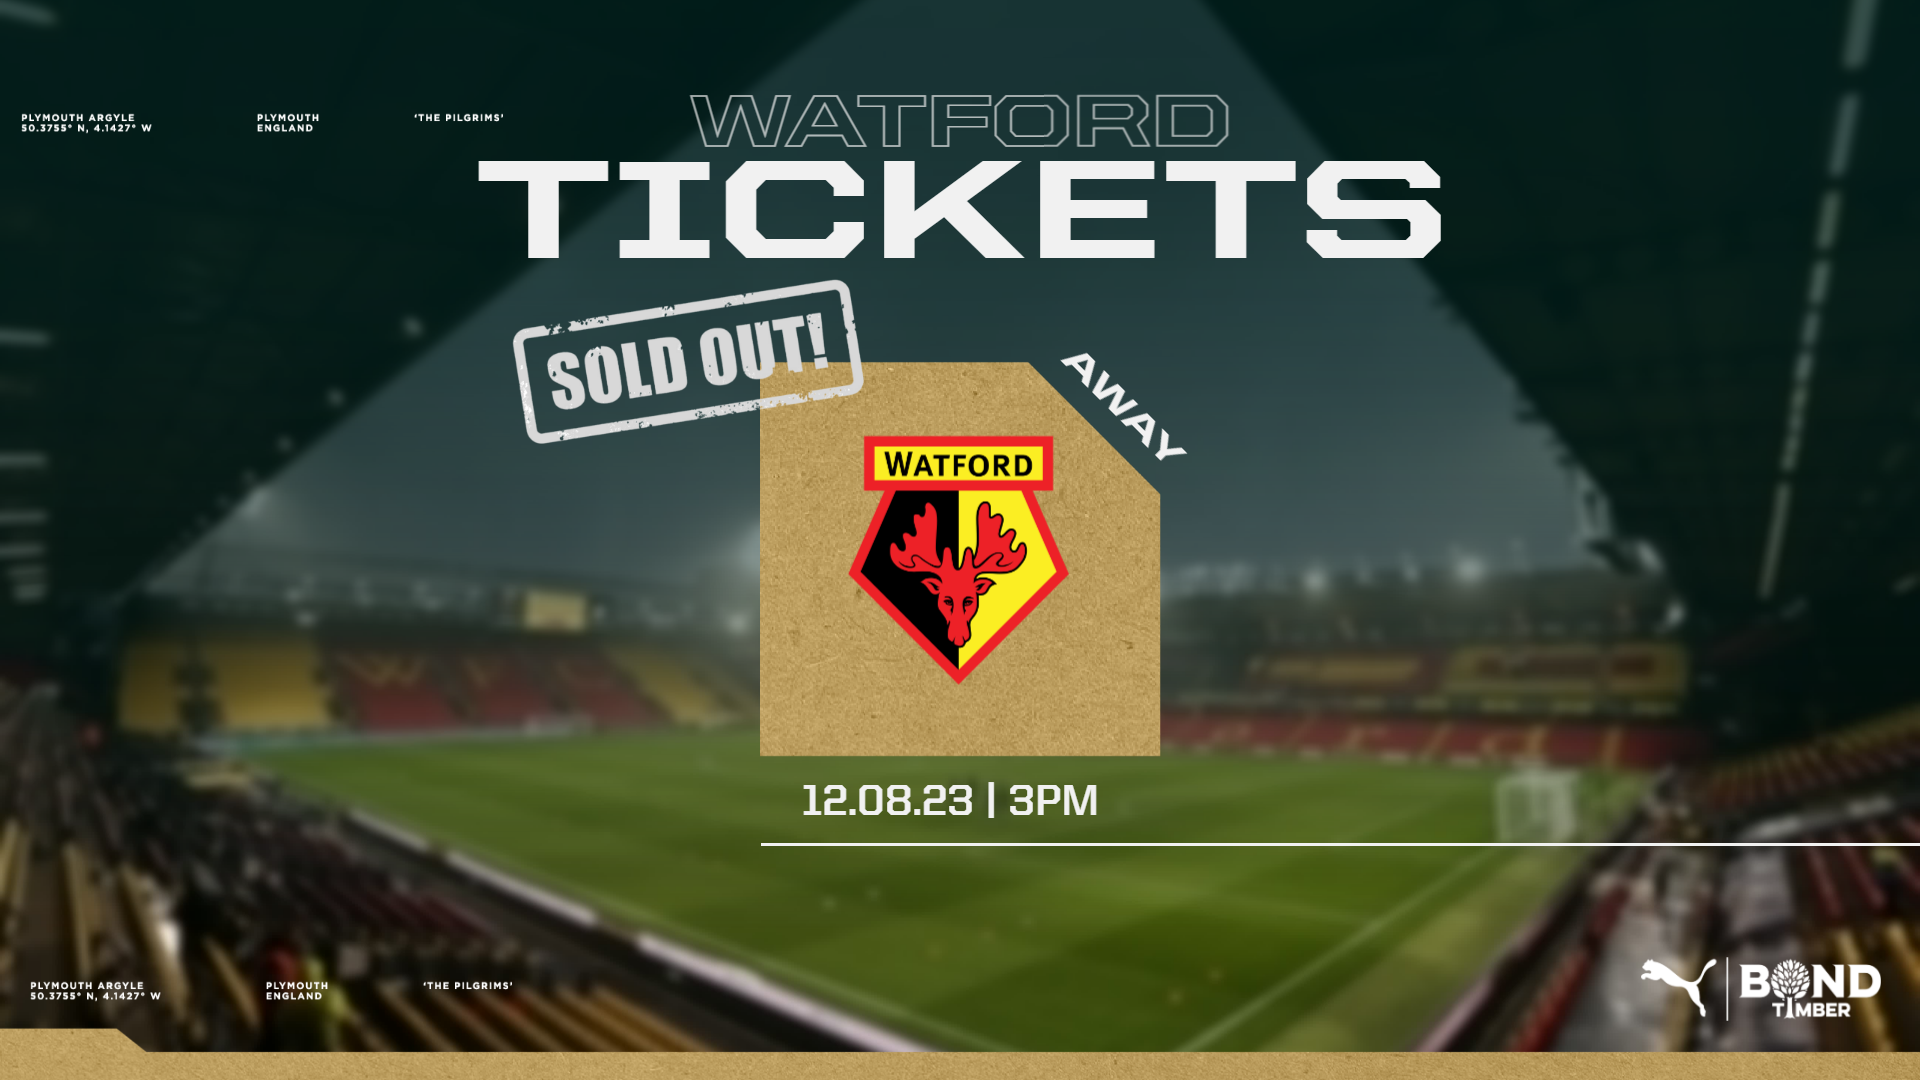 Watford Tickets sold out